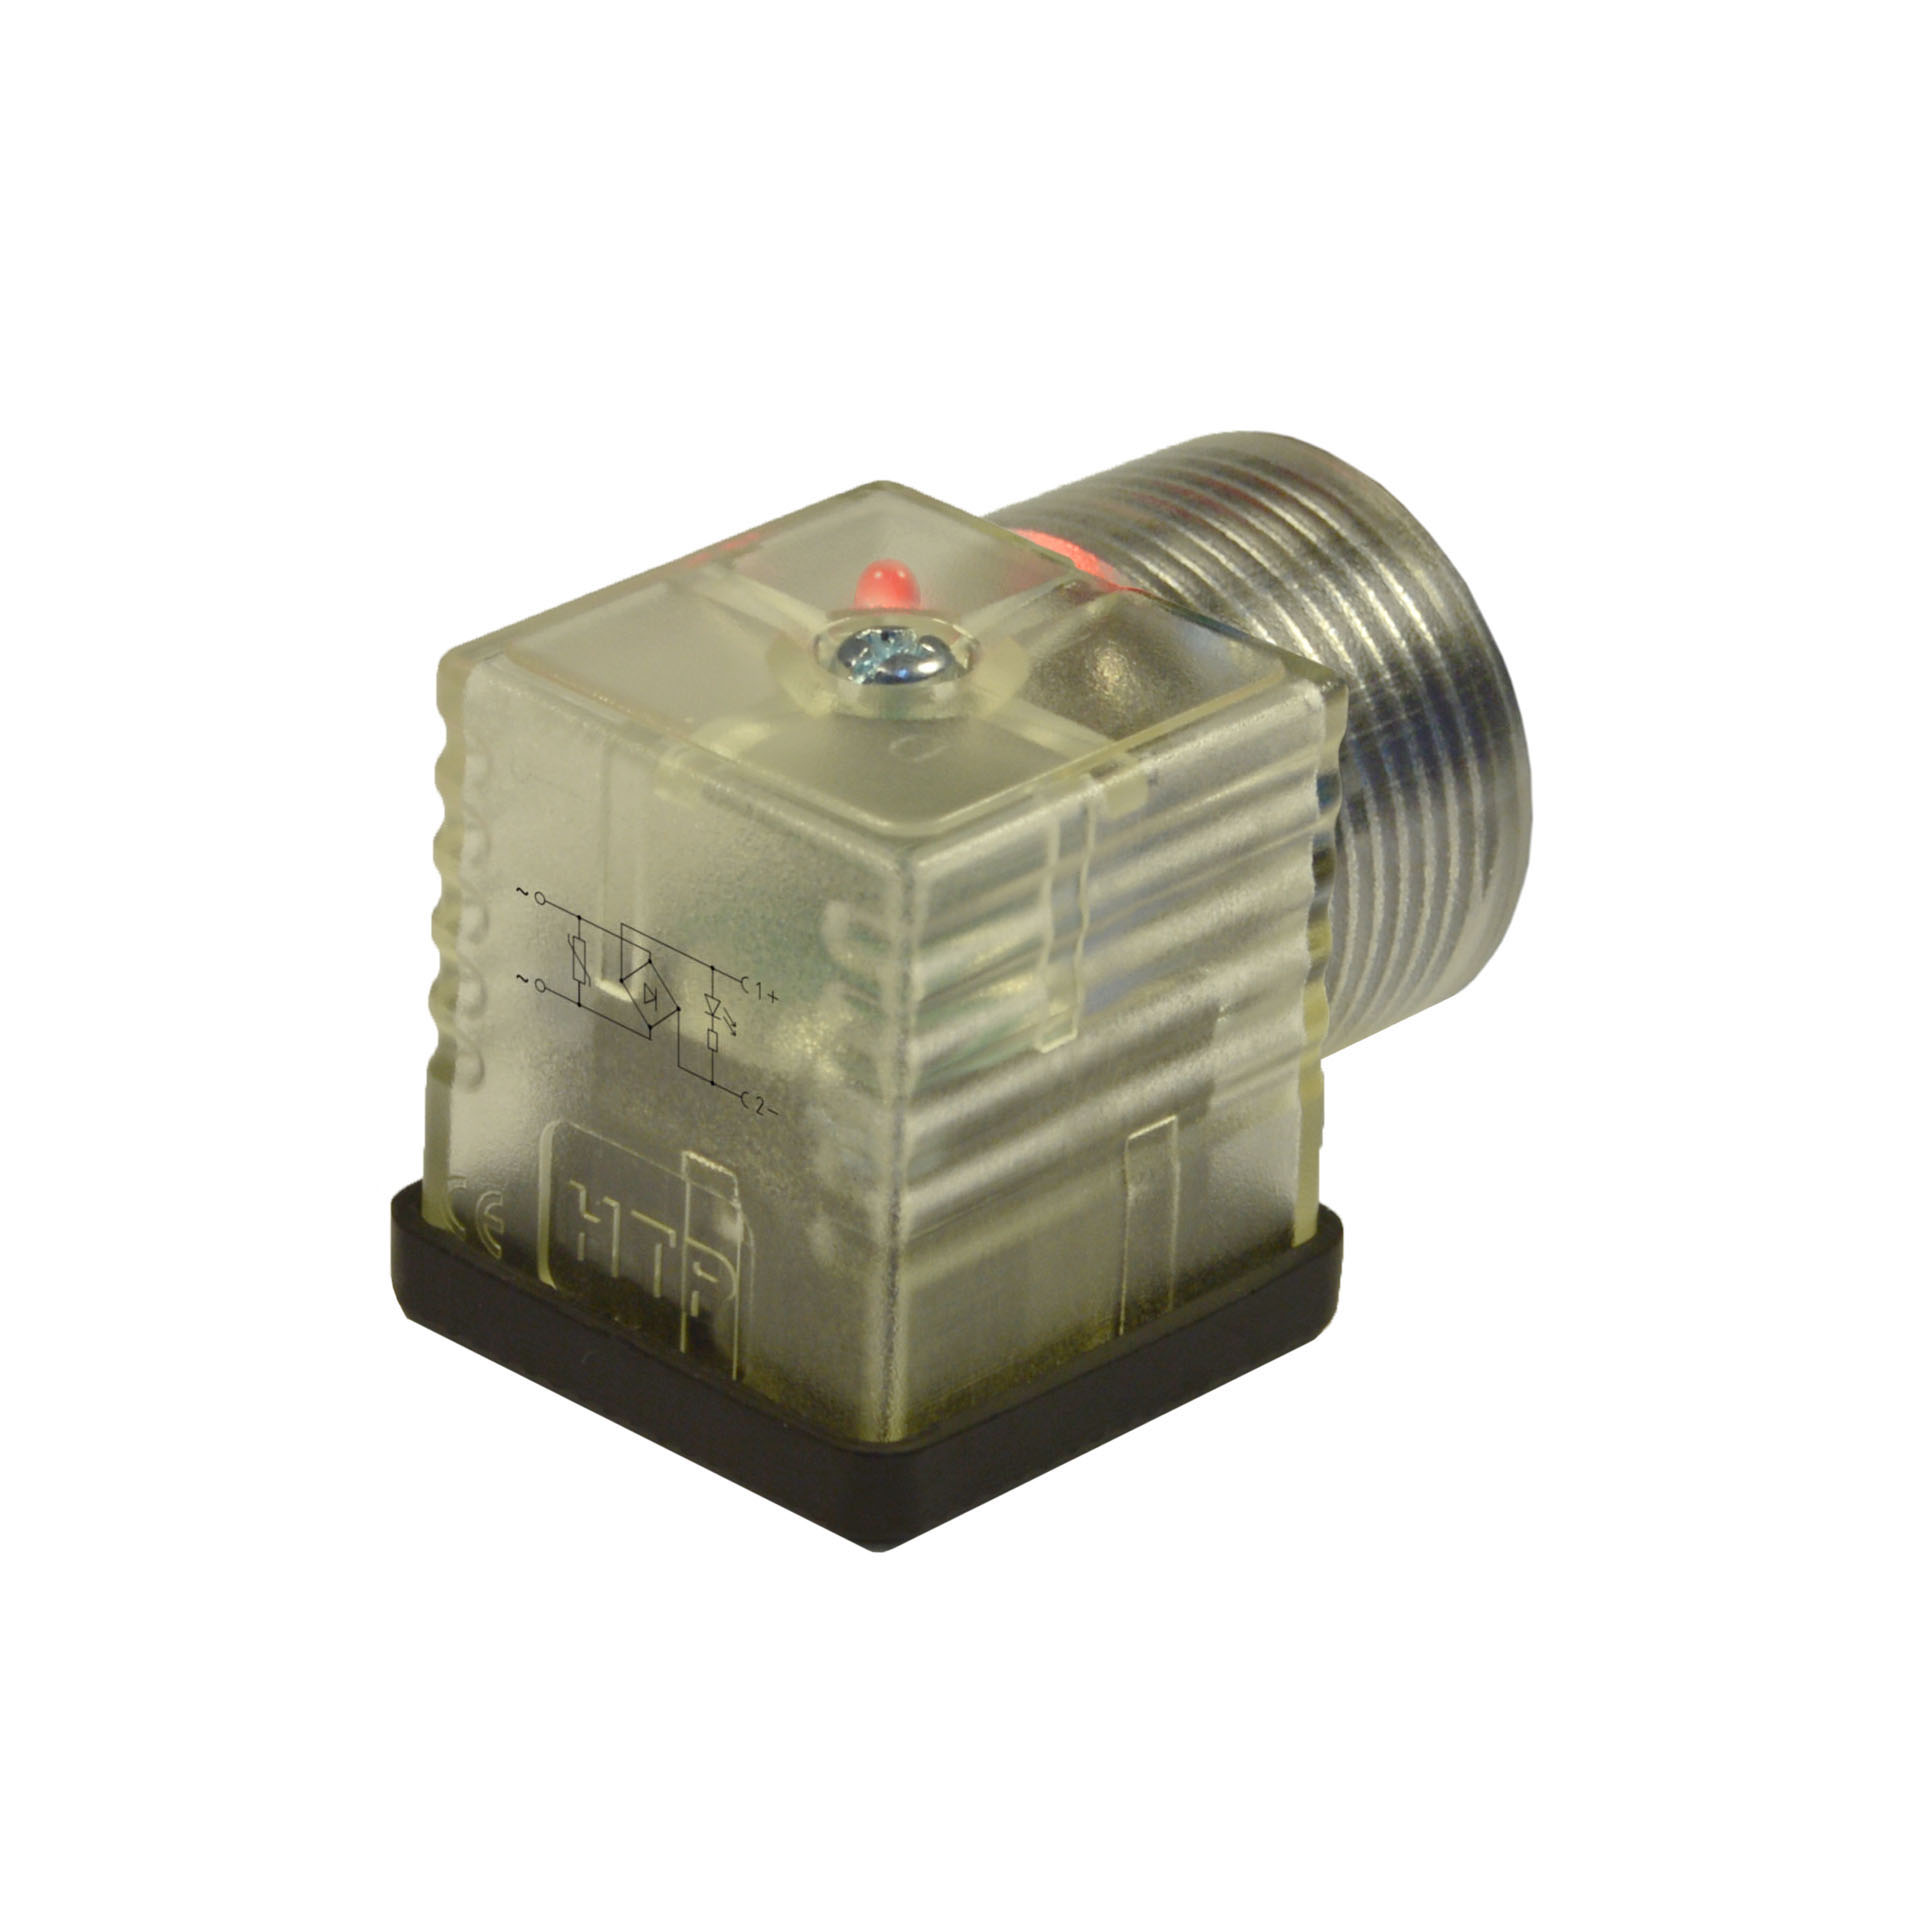 EN175301-803(typeA)field attachable,2p+PE(h.12),Red LED+vdr+rectifier,115VAC,1/2"NPTF